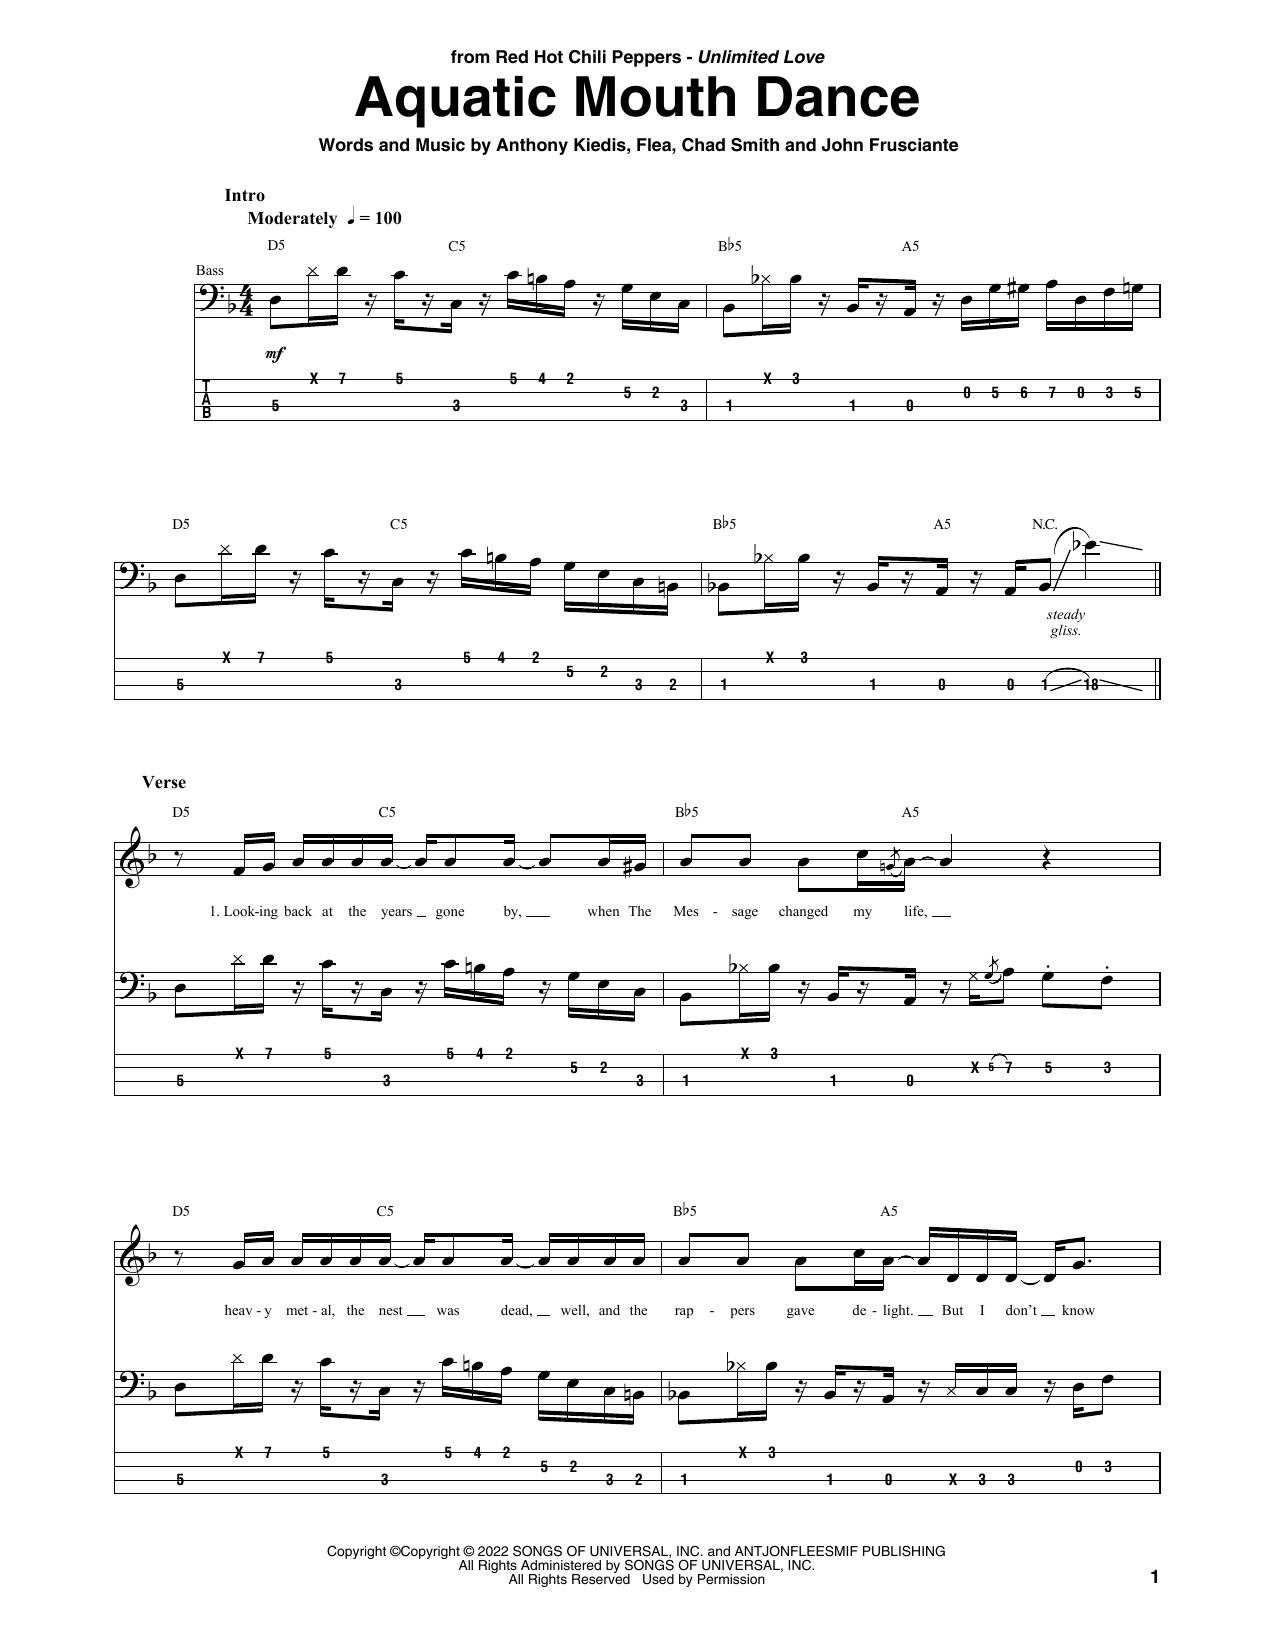 Download Red Hot Chili Peppers Aquatic Mouth Dance Sheet Music